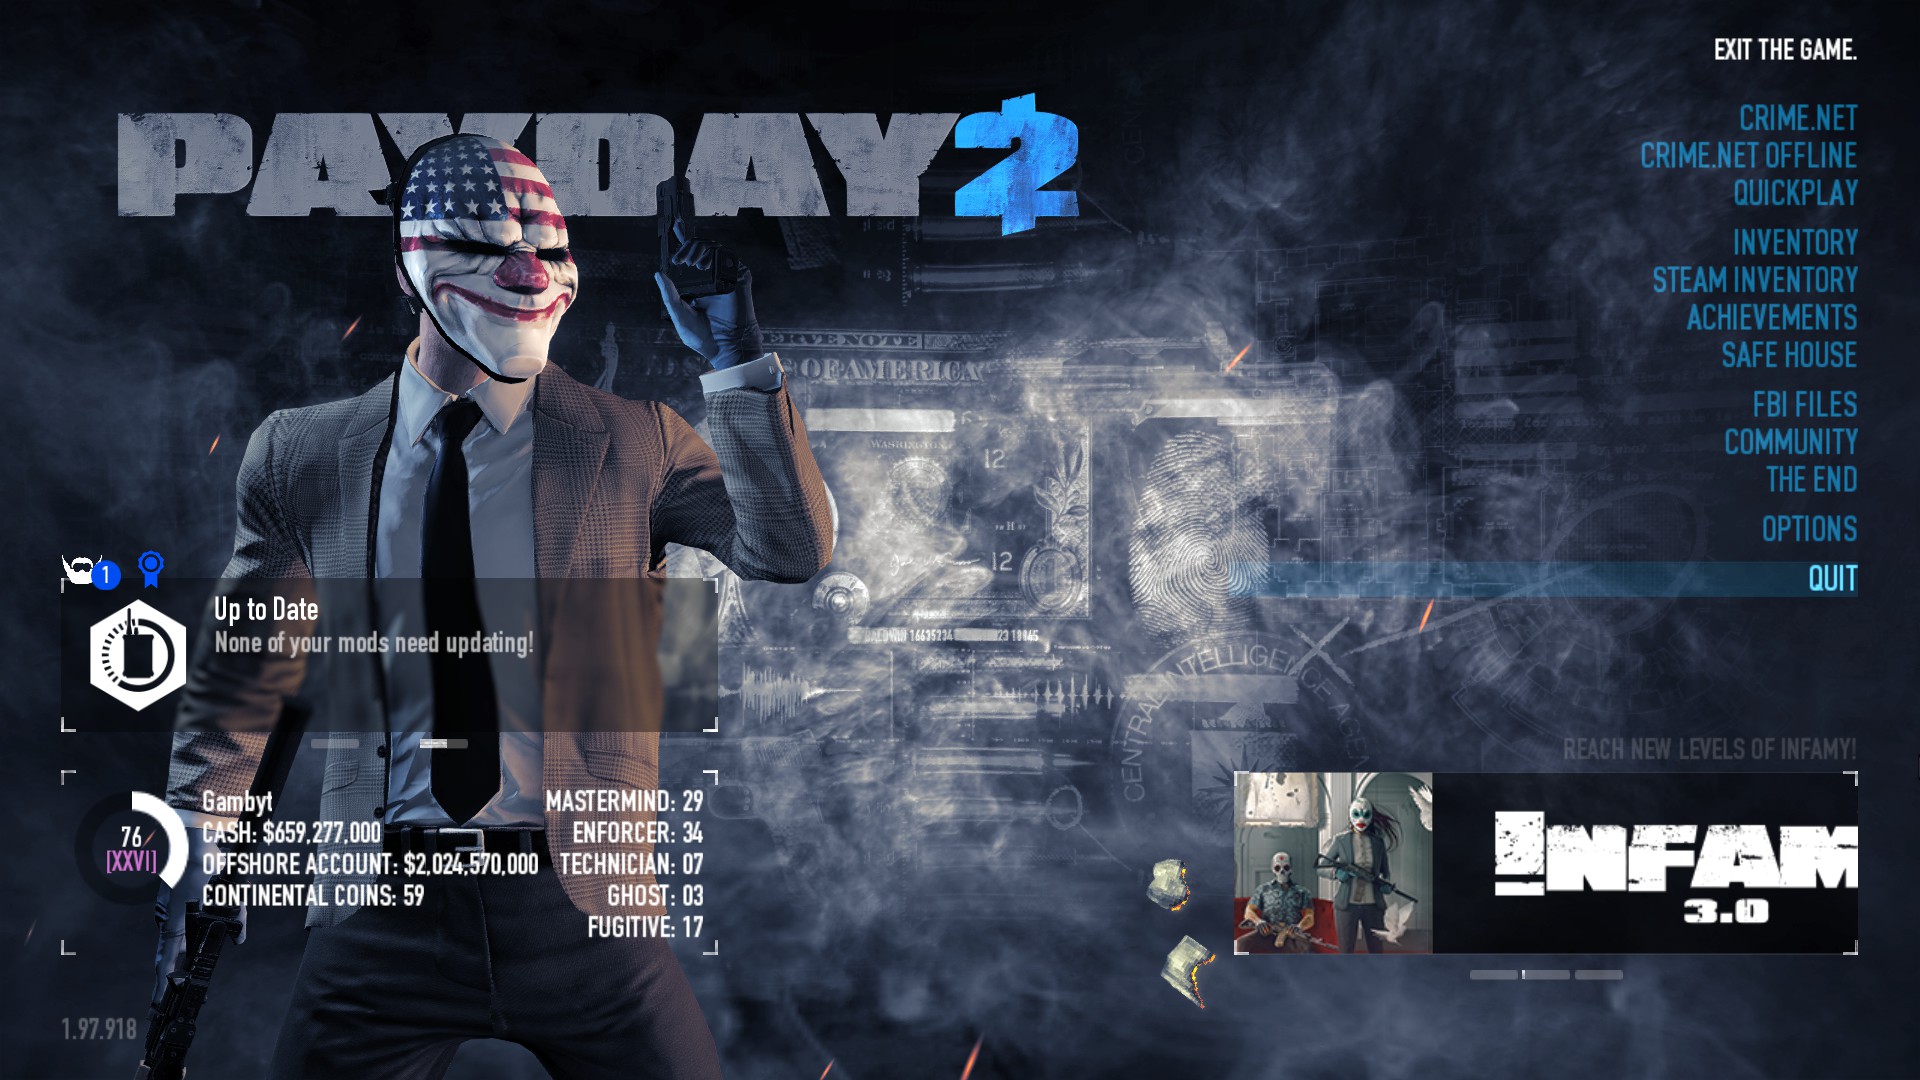 Sleeping Dogs - Benny The Manager [LAS] - PAYDAY 2 Mods - ModWorkshop